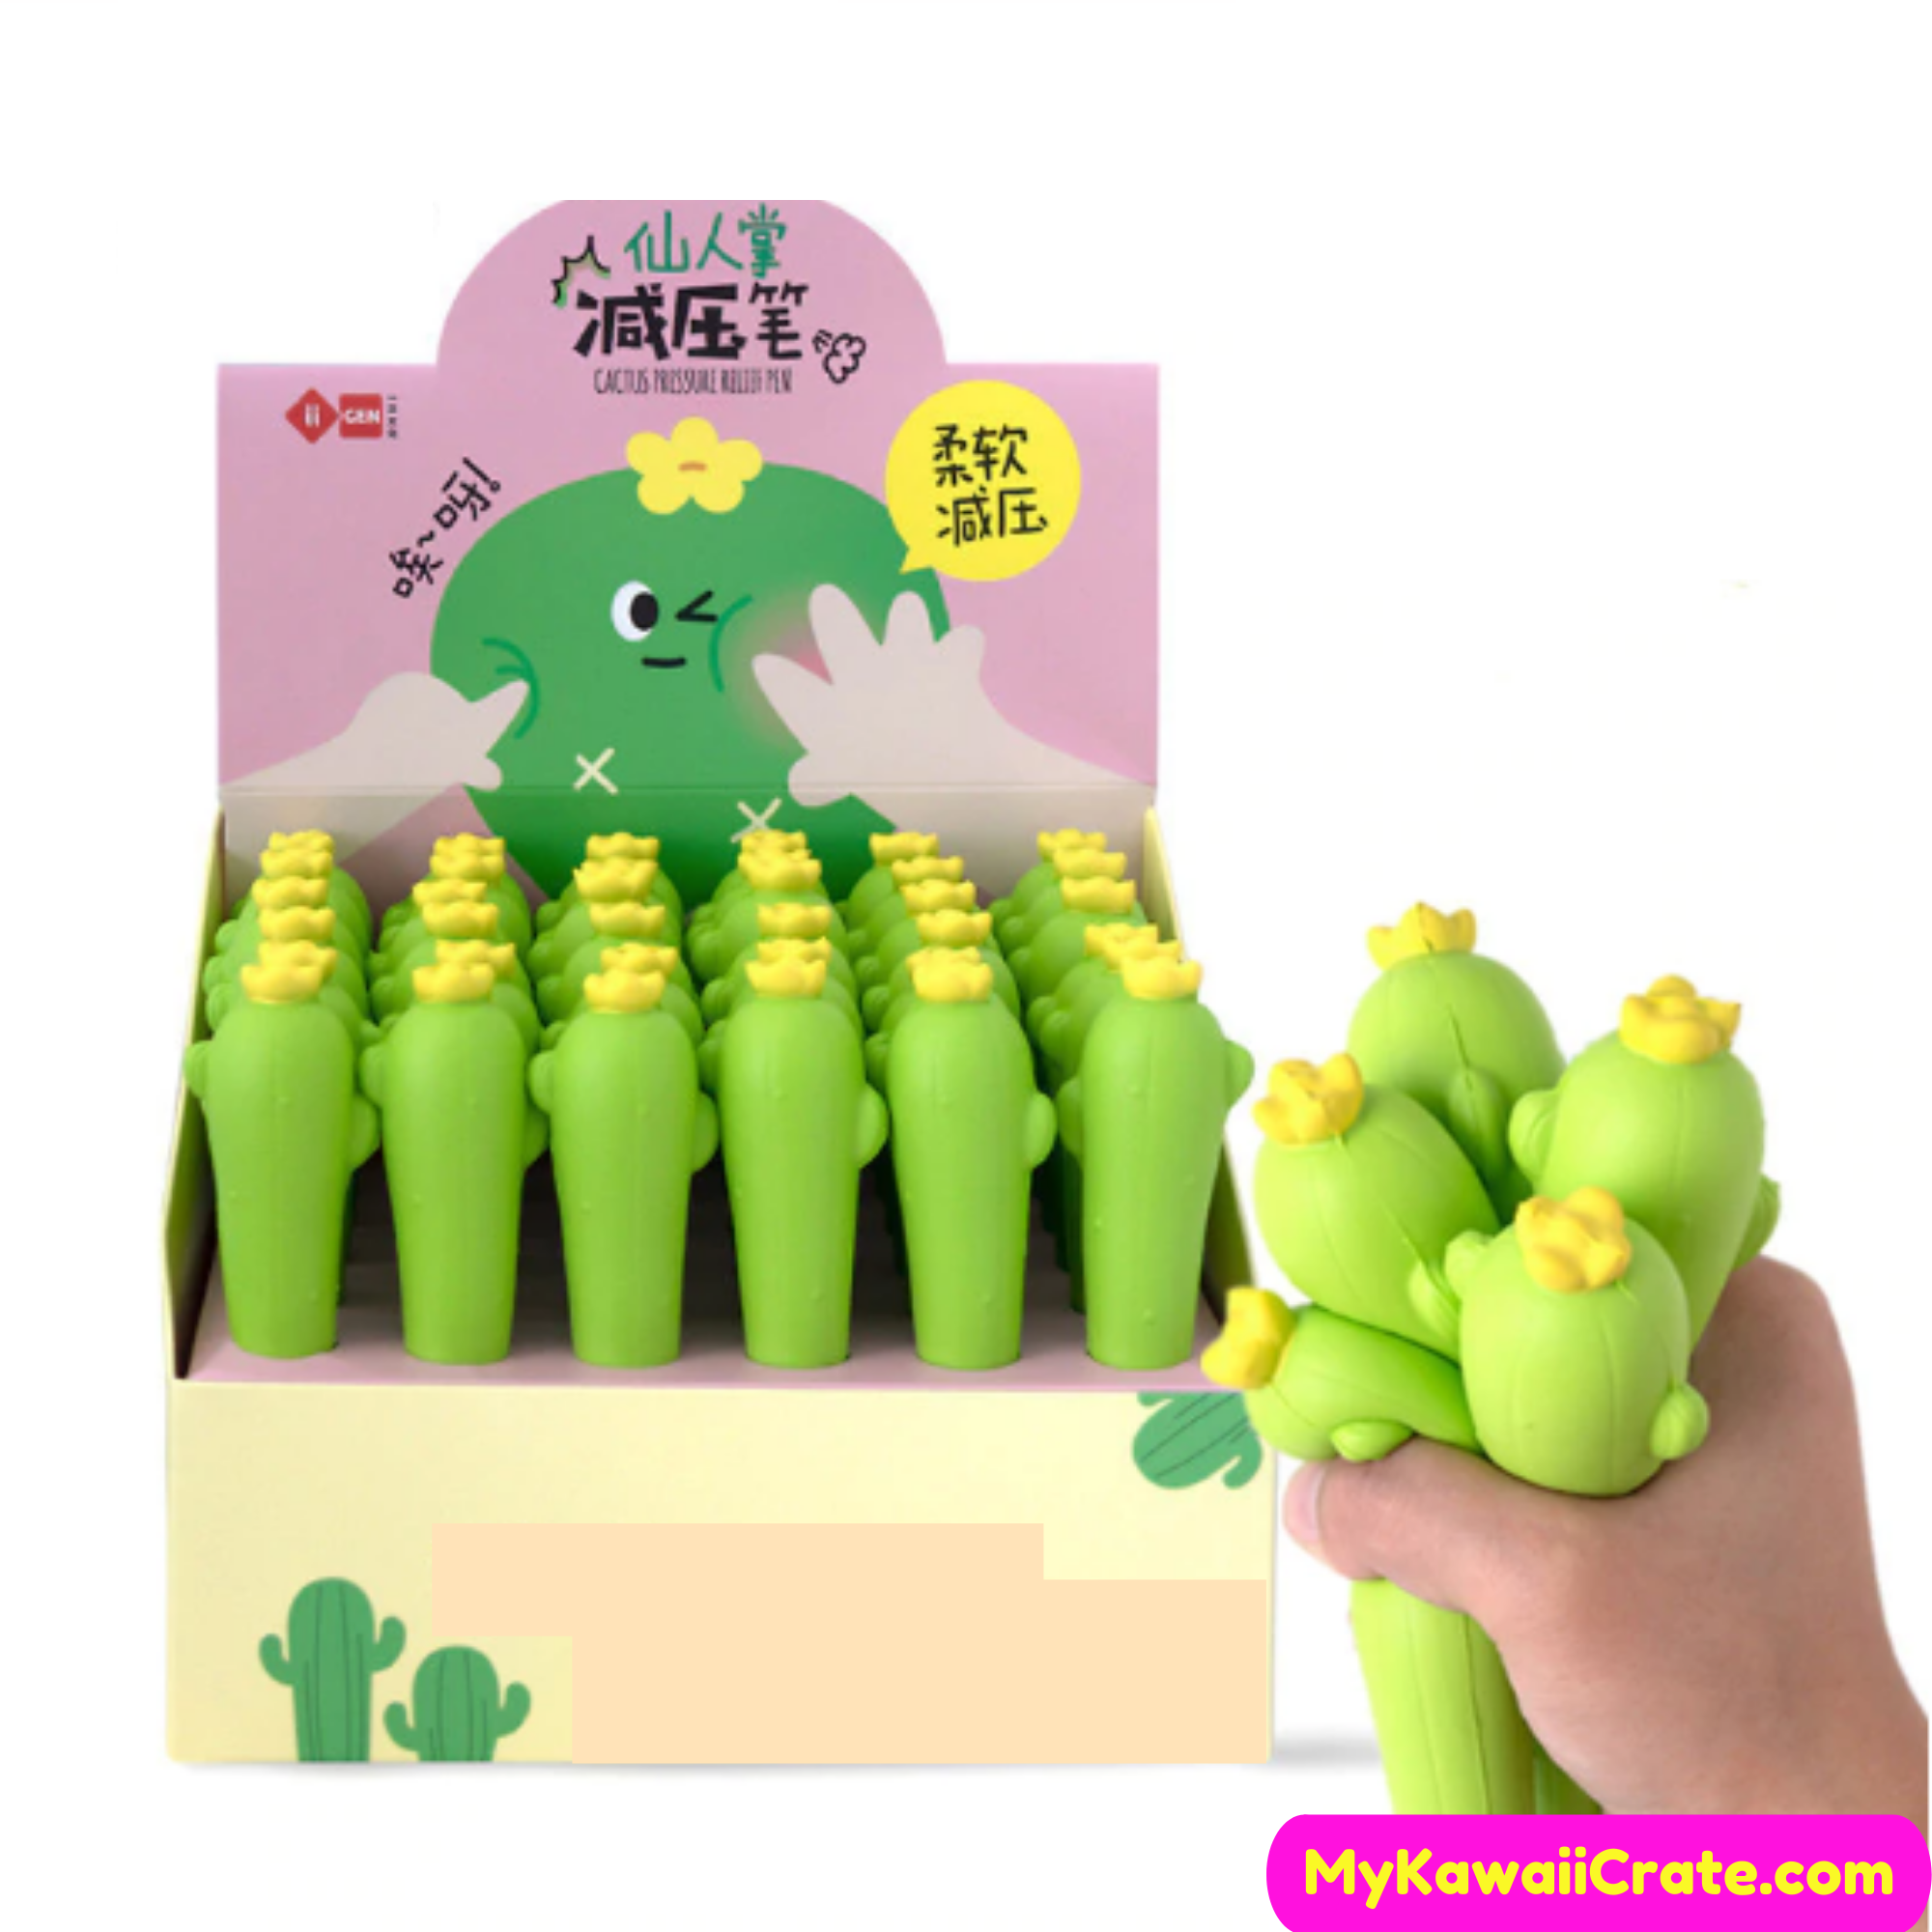 Pen with Plush Cactus by Mr. Wonderful